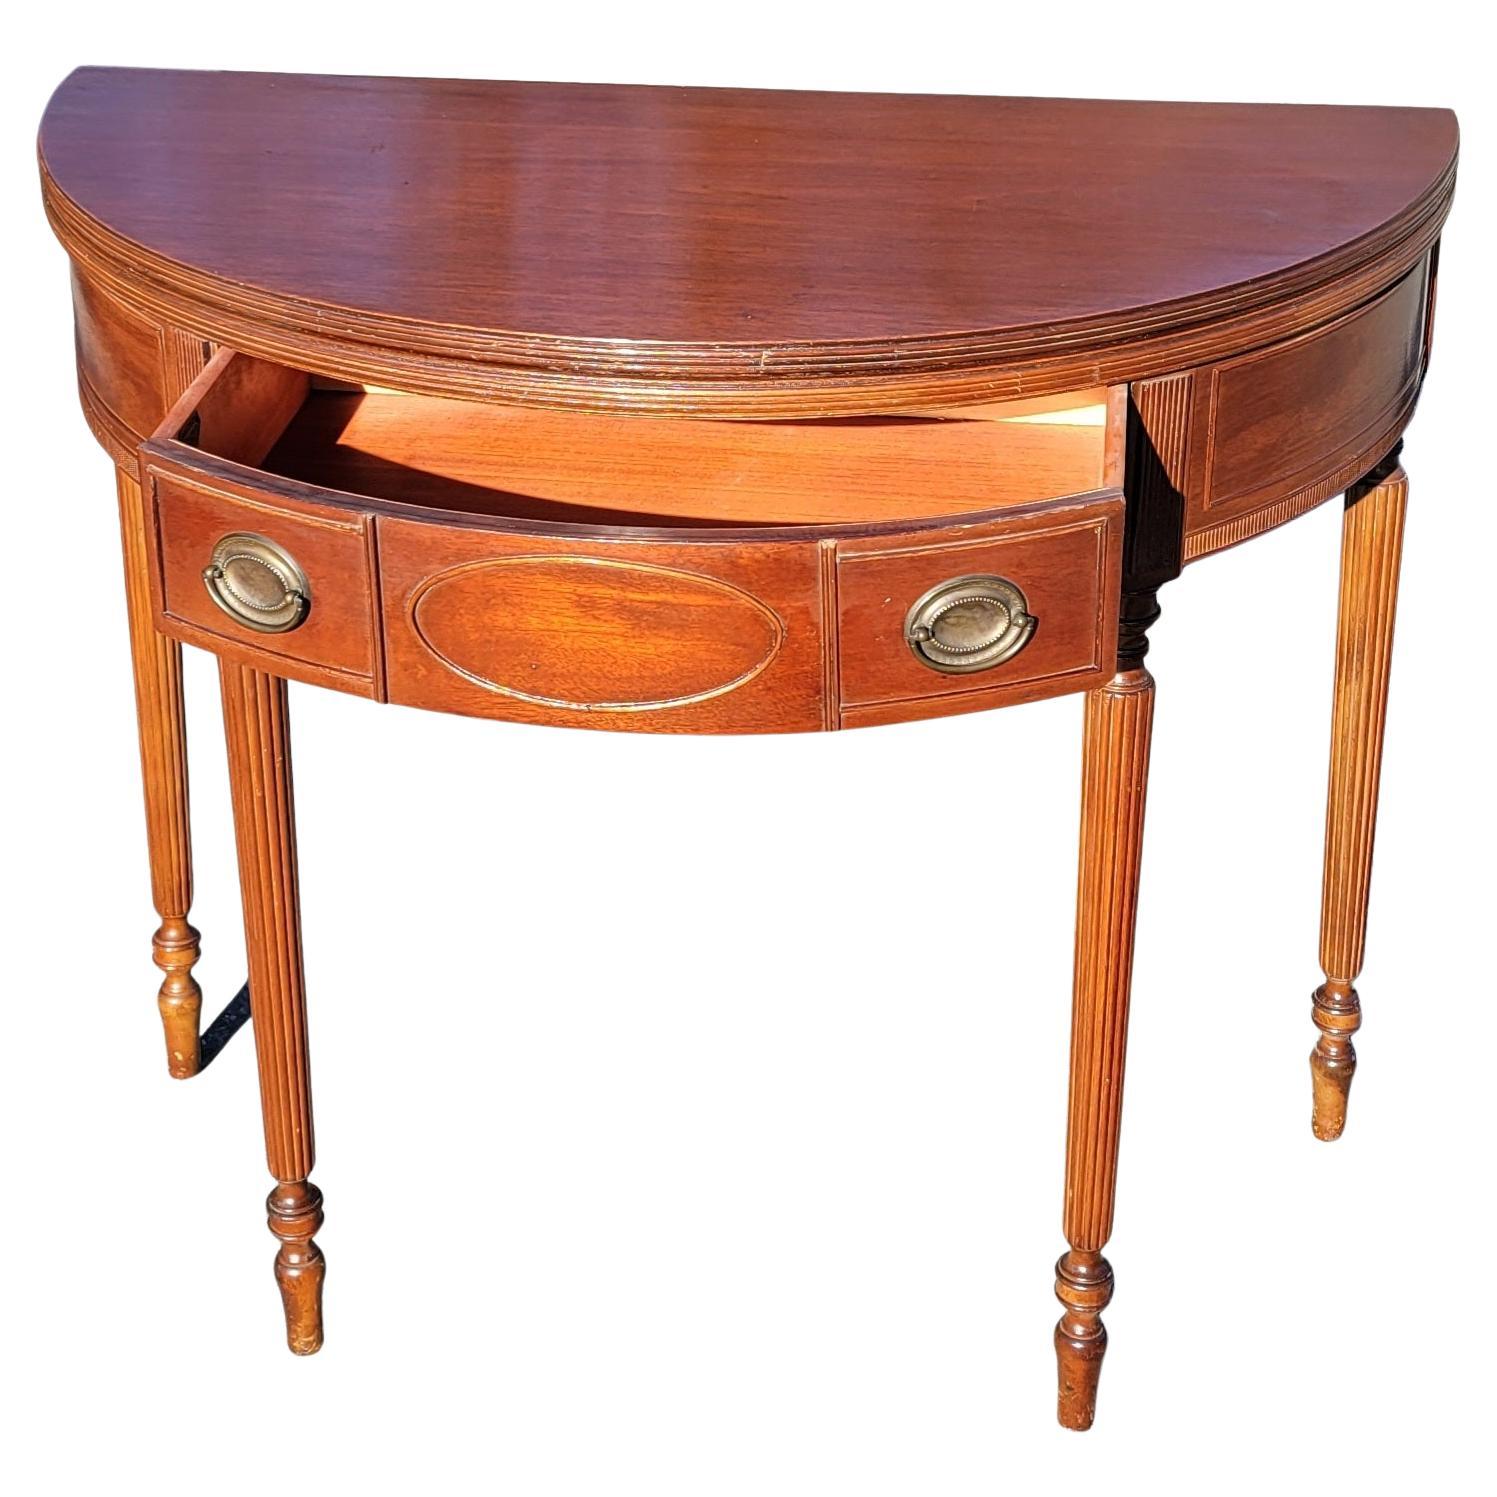 American 19th Century Federal Hepplewhite Mahogany Demi-Lune Flip-Top Console Card Table For Sale